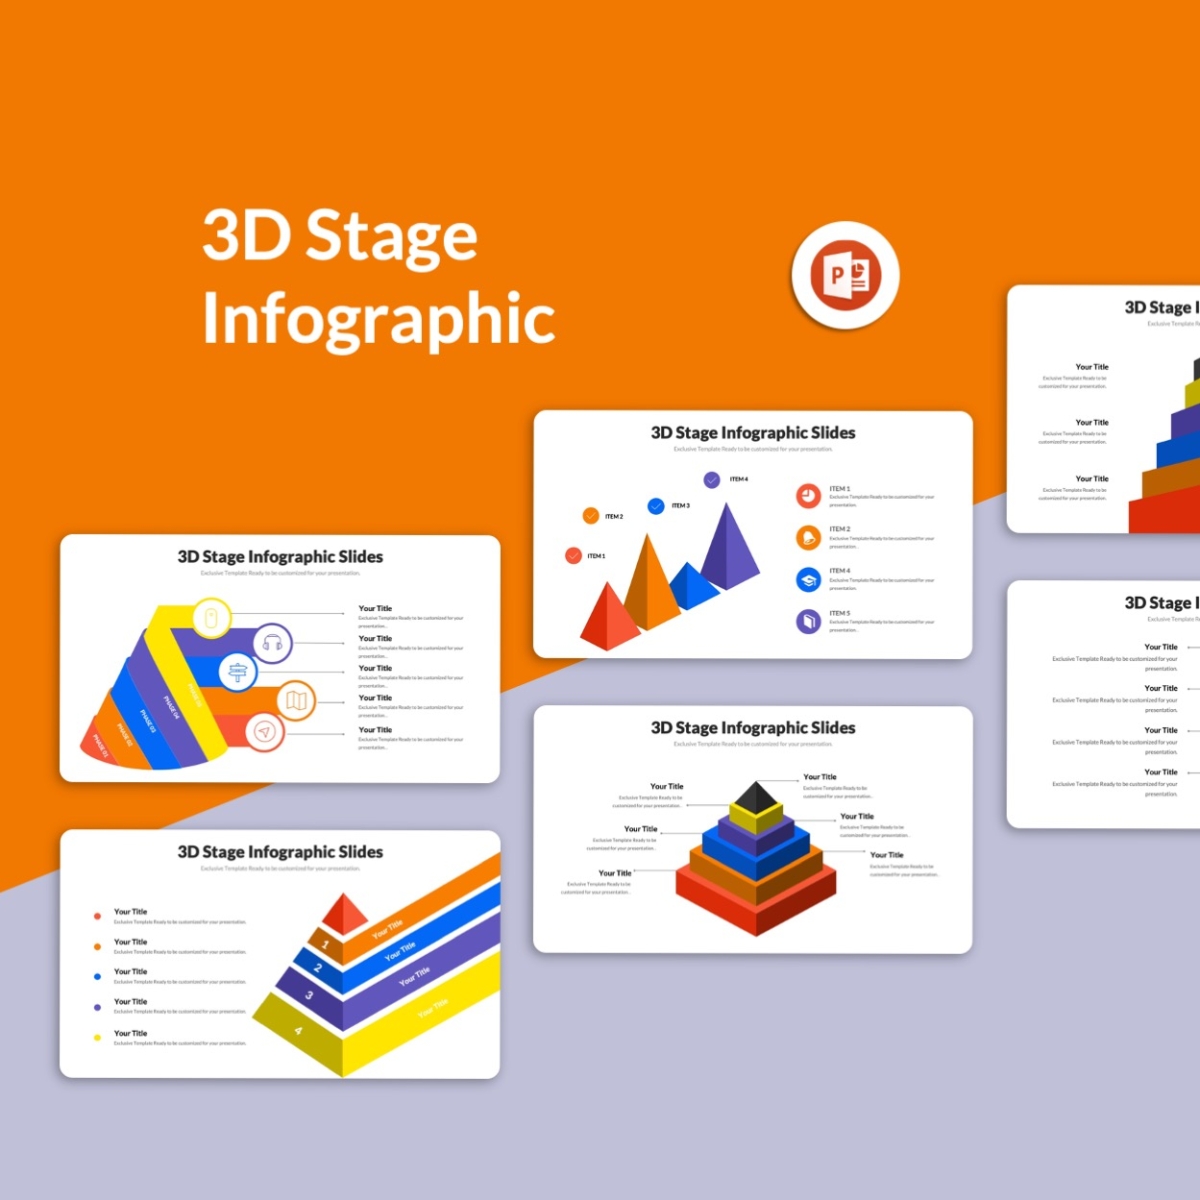 3D Stage Infographic PowerPoint Slides Template